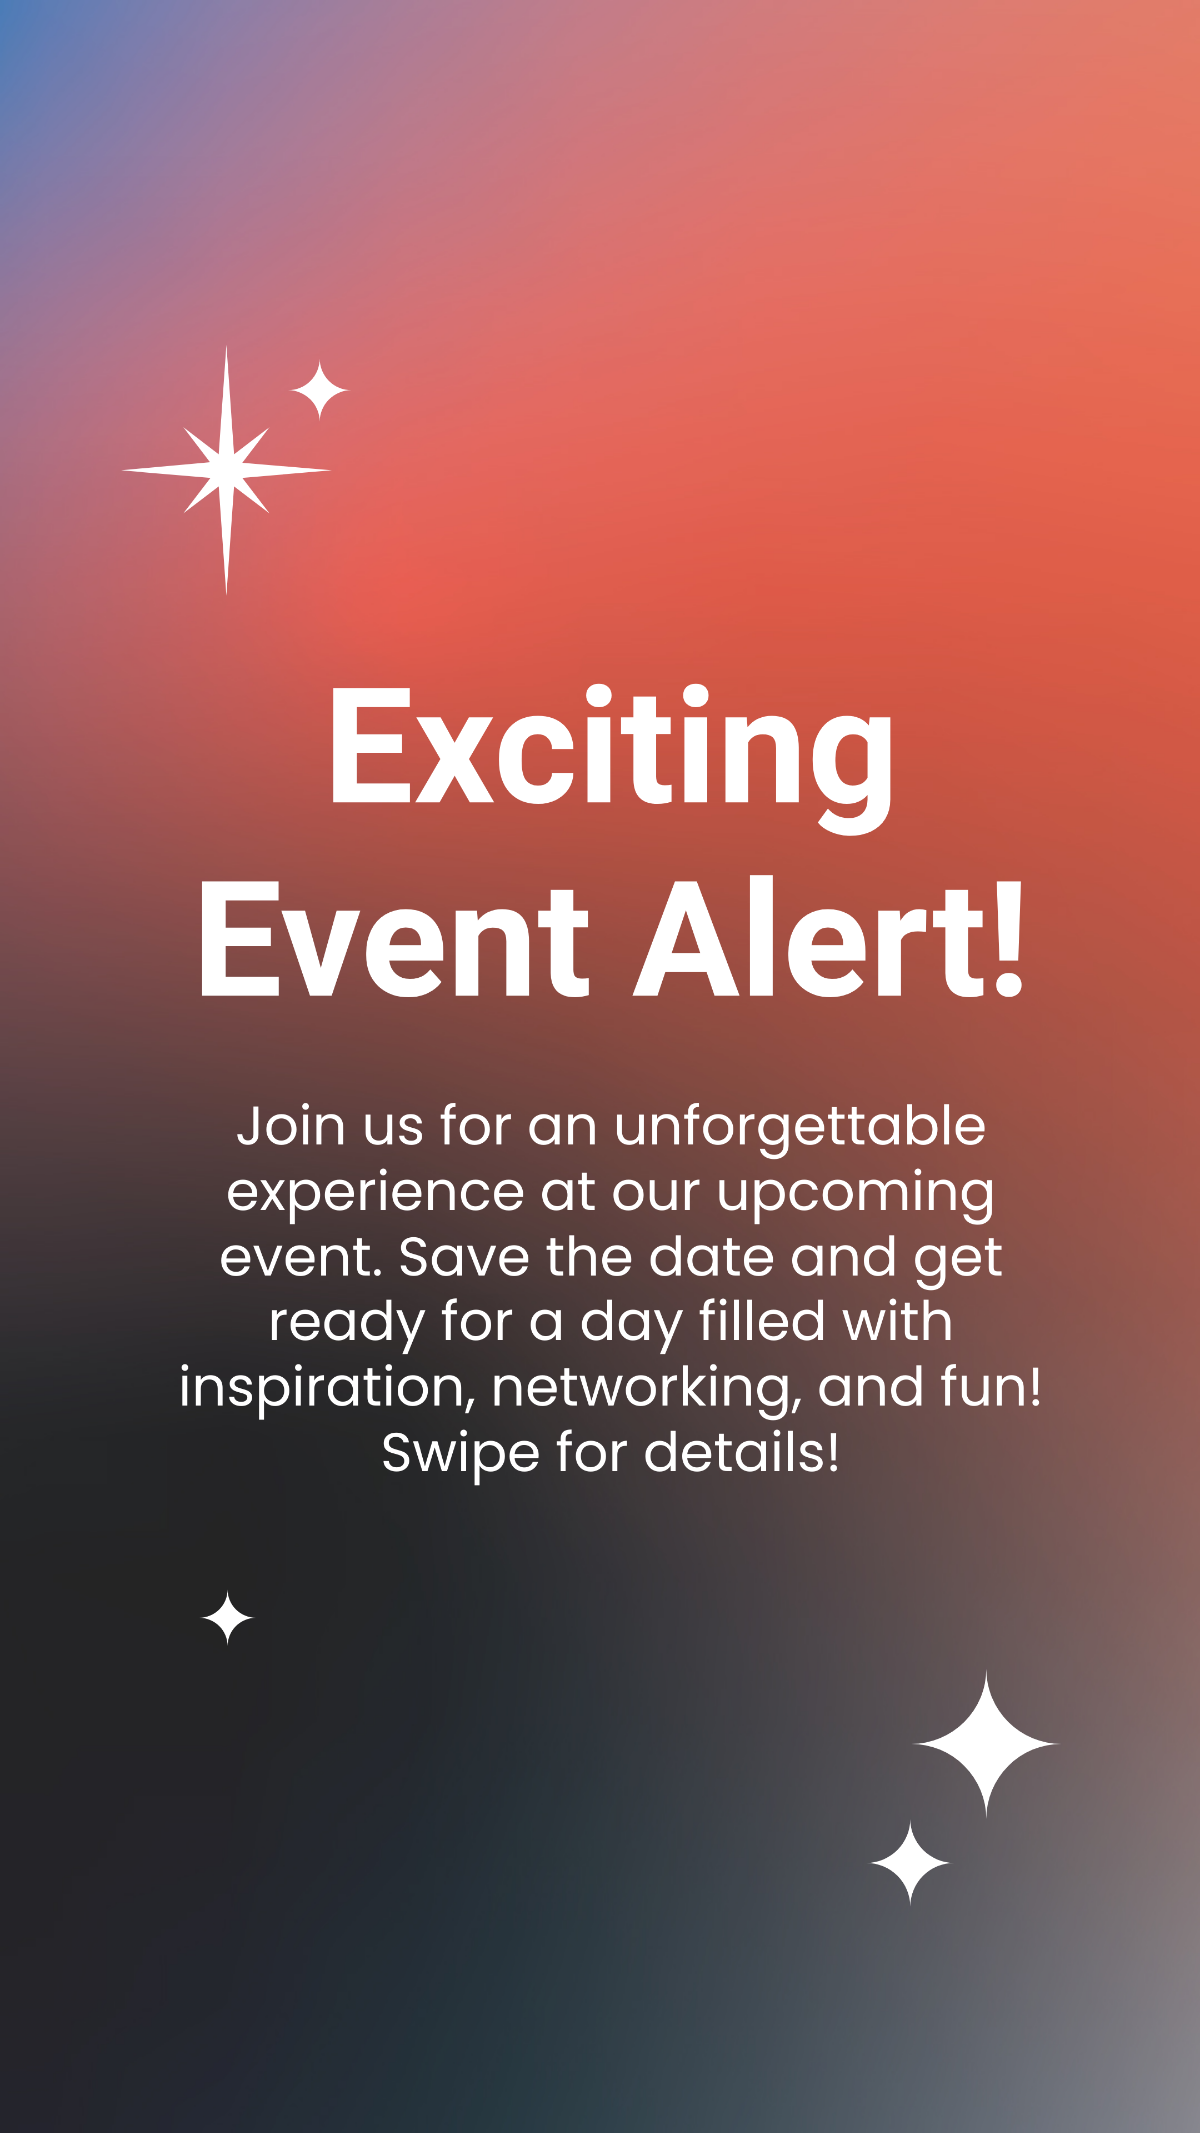 Event Announcement Carousel Instagram Post Template